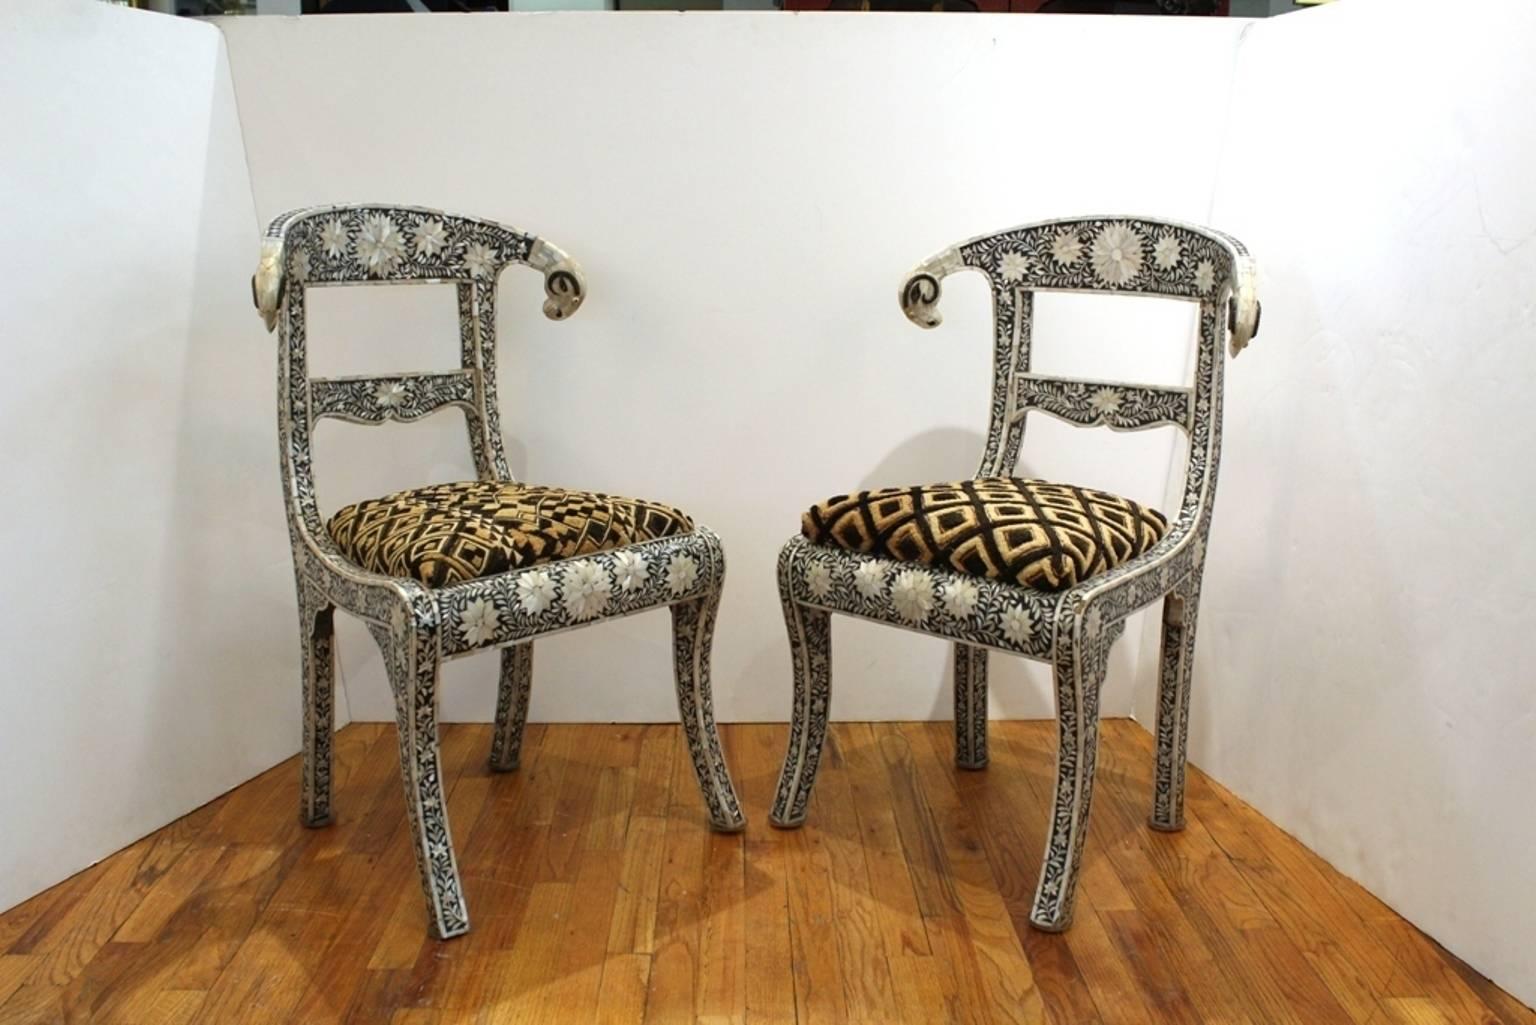 Pair of Klismos chairs inlaid with bone and mother-of-pearl arranged in elaborate floral designs. Includes a pair of detailed ram heads on each end of the chair back. Despite some small chips and missing tiles to the inlay, the chairs remain in